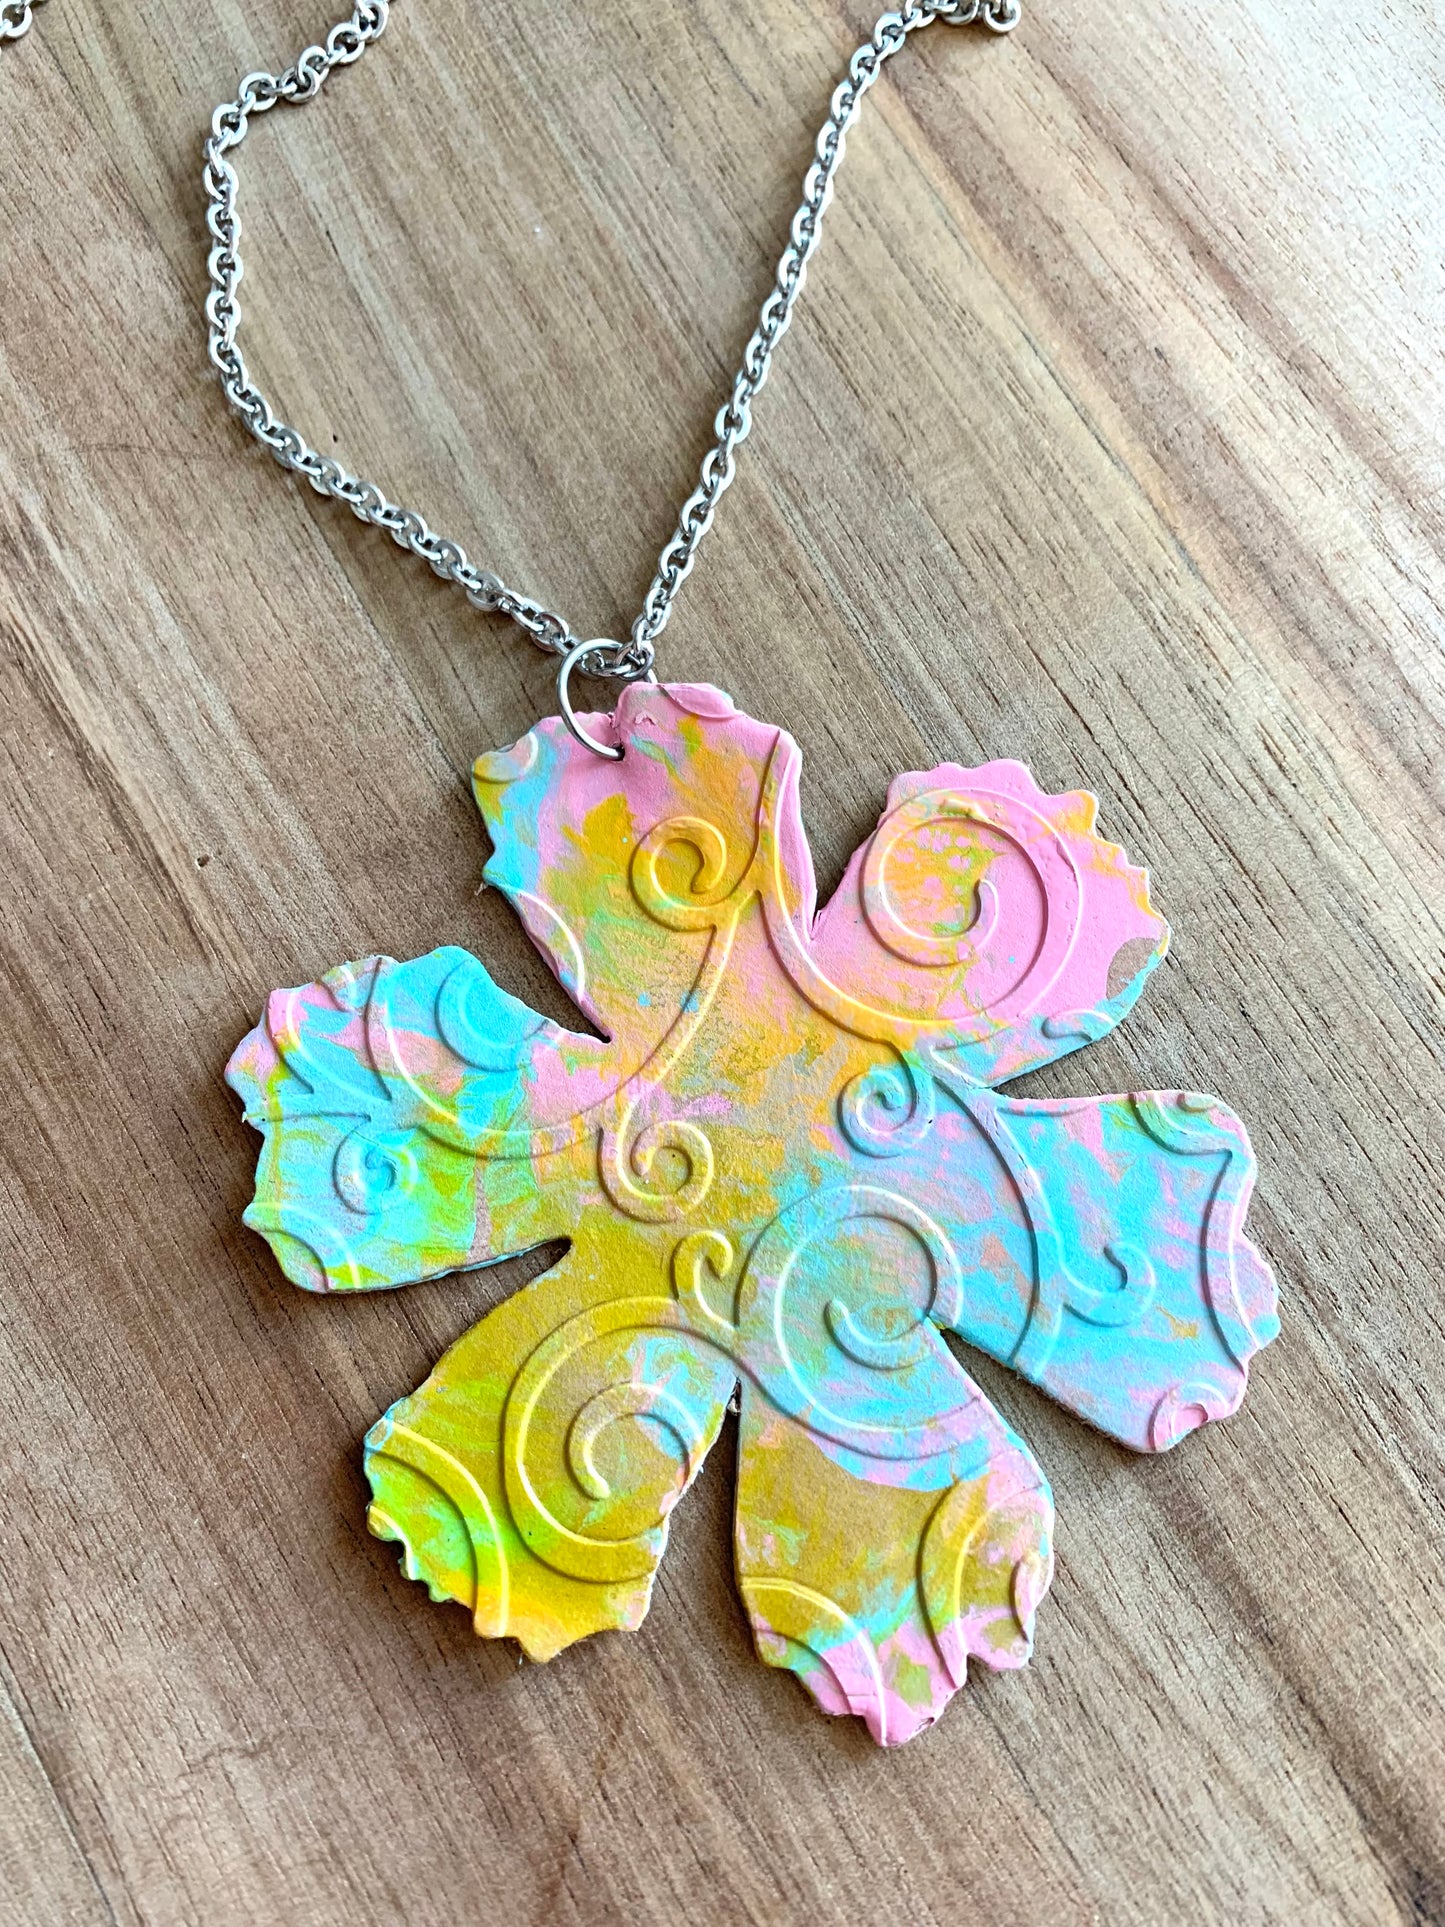 HAND PAINTED FLOWER NECKLACE